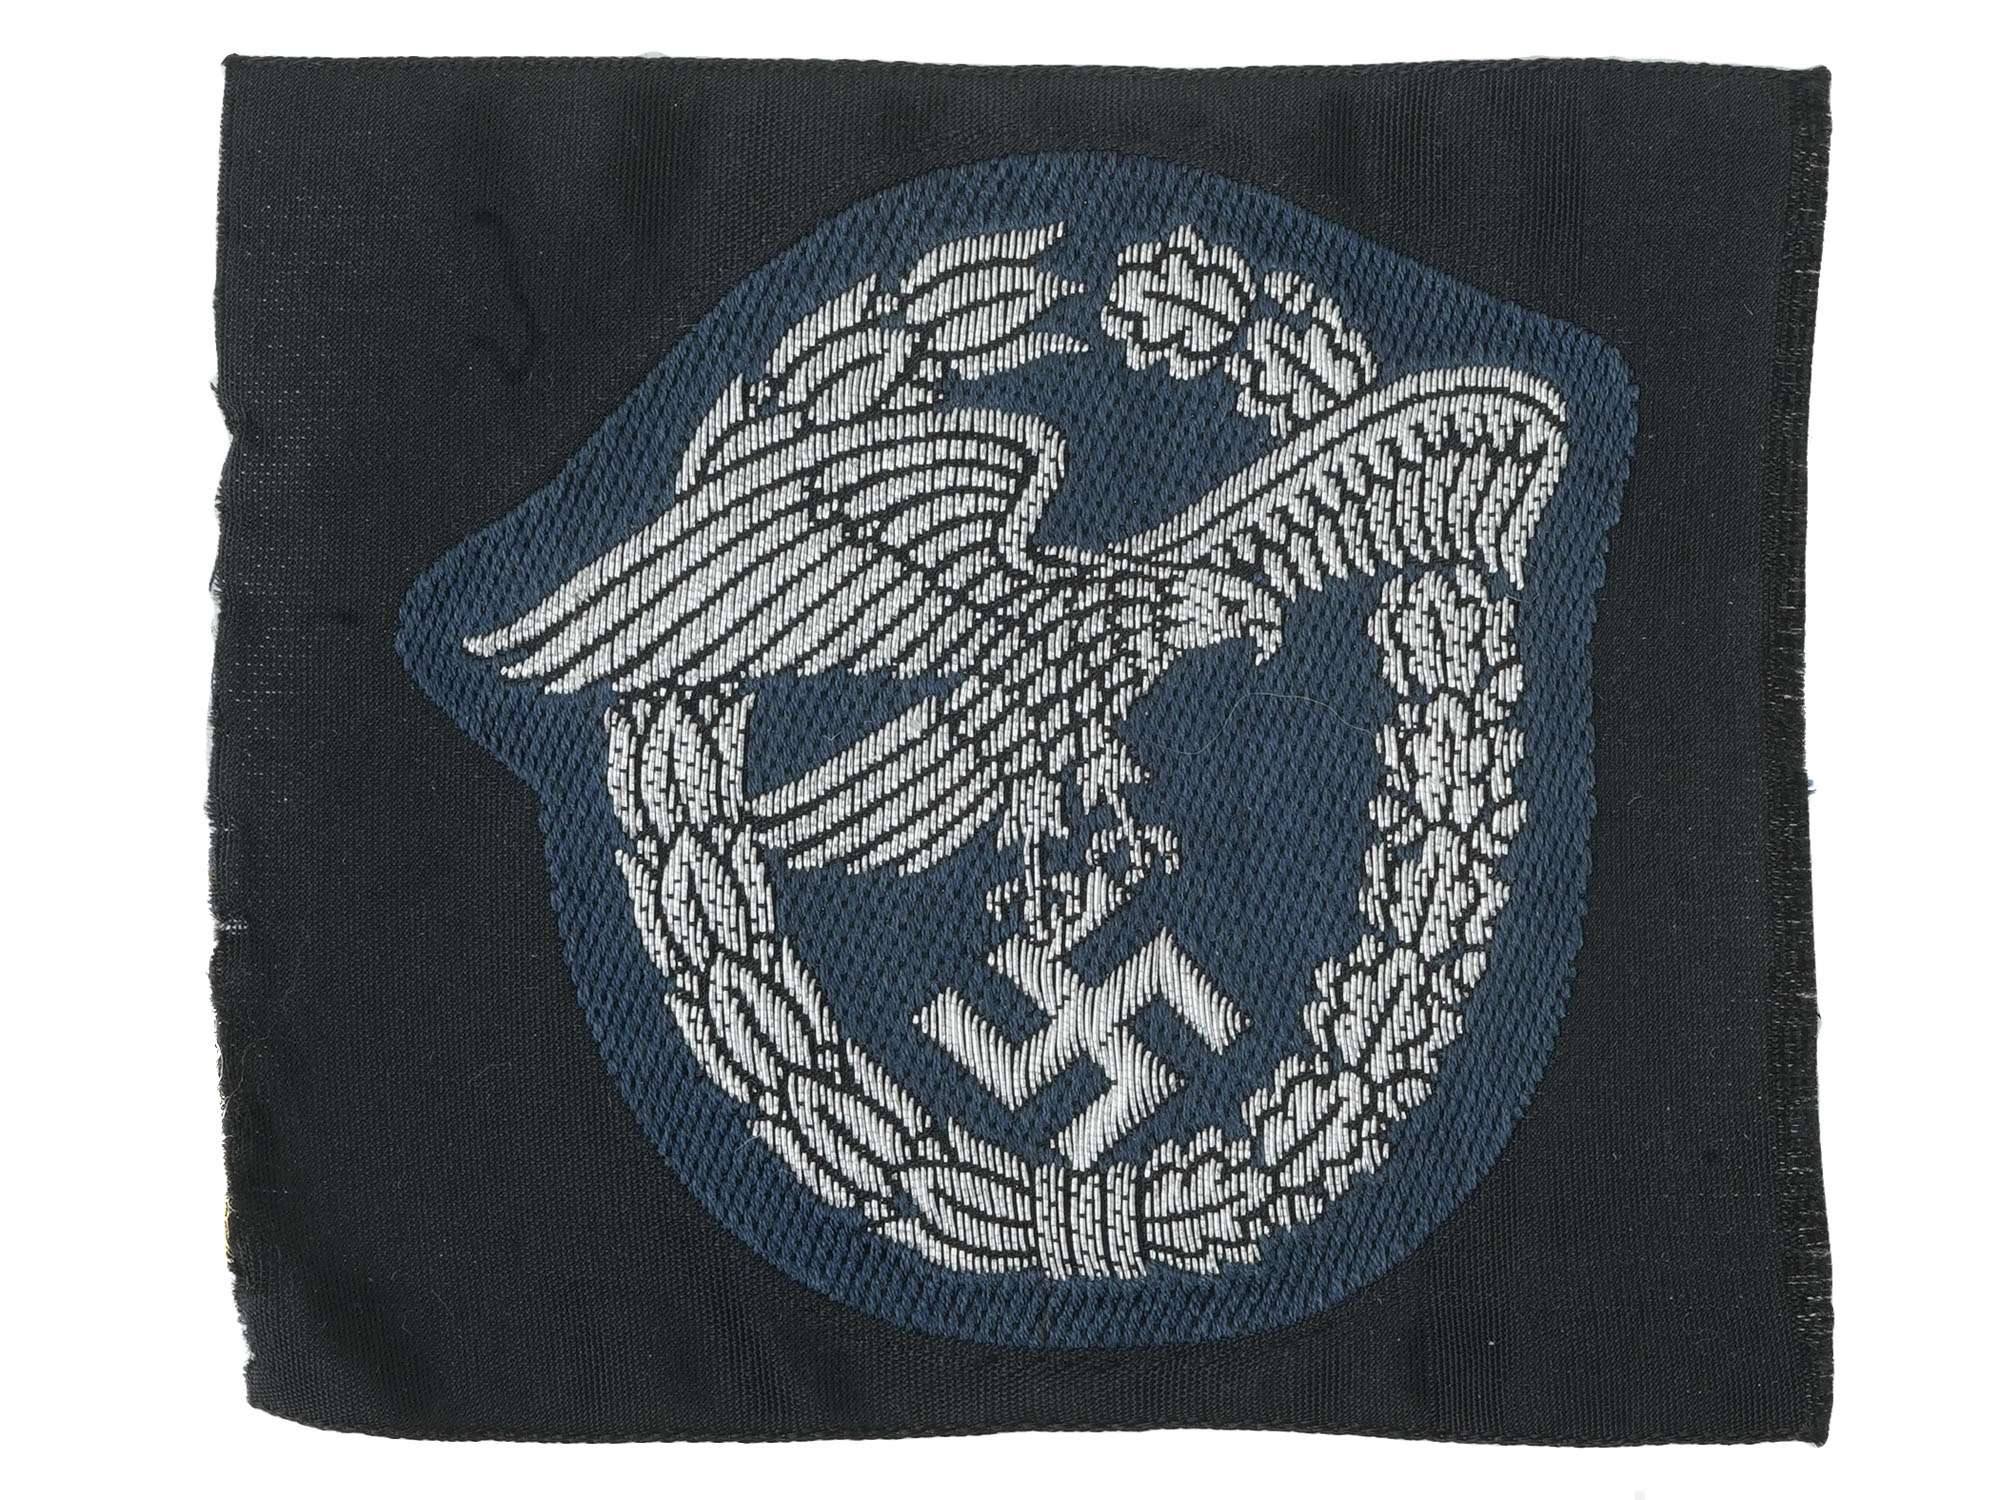 WWII NAZI GERMAN FABRIC EAGLE PATCHES 11 ITEMS PIC-5